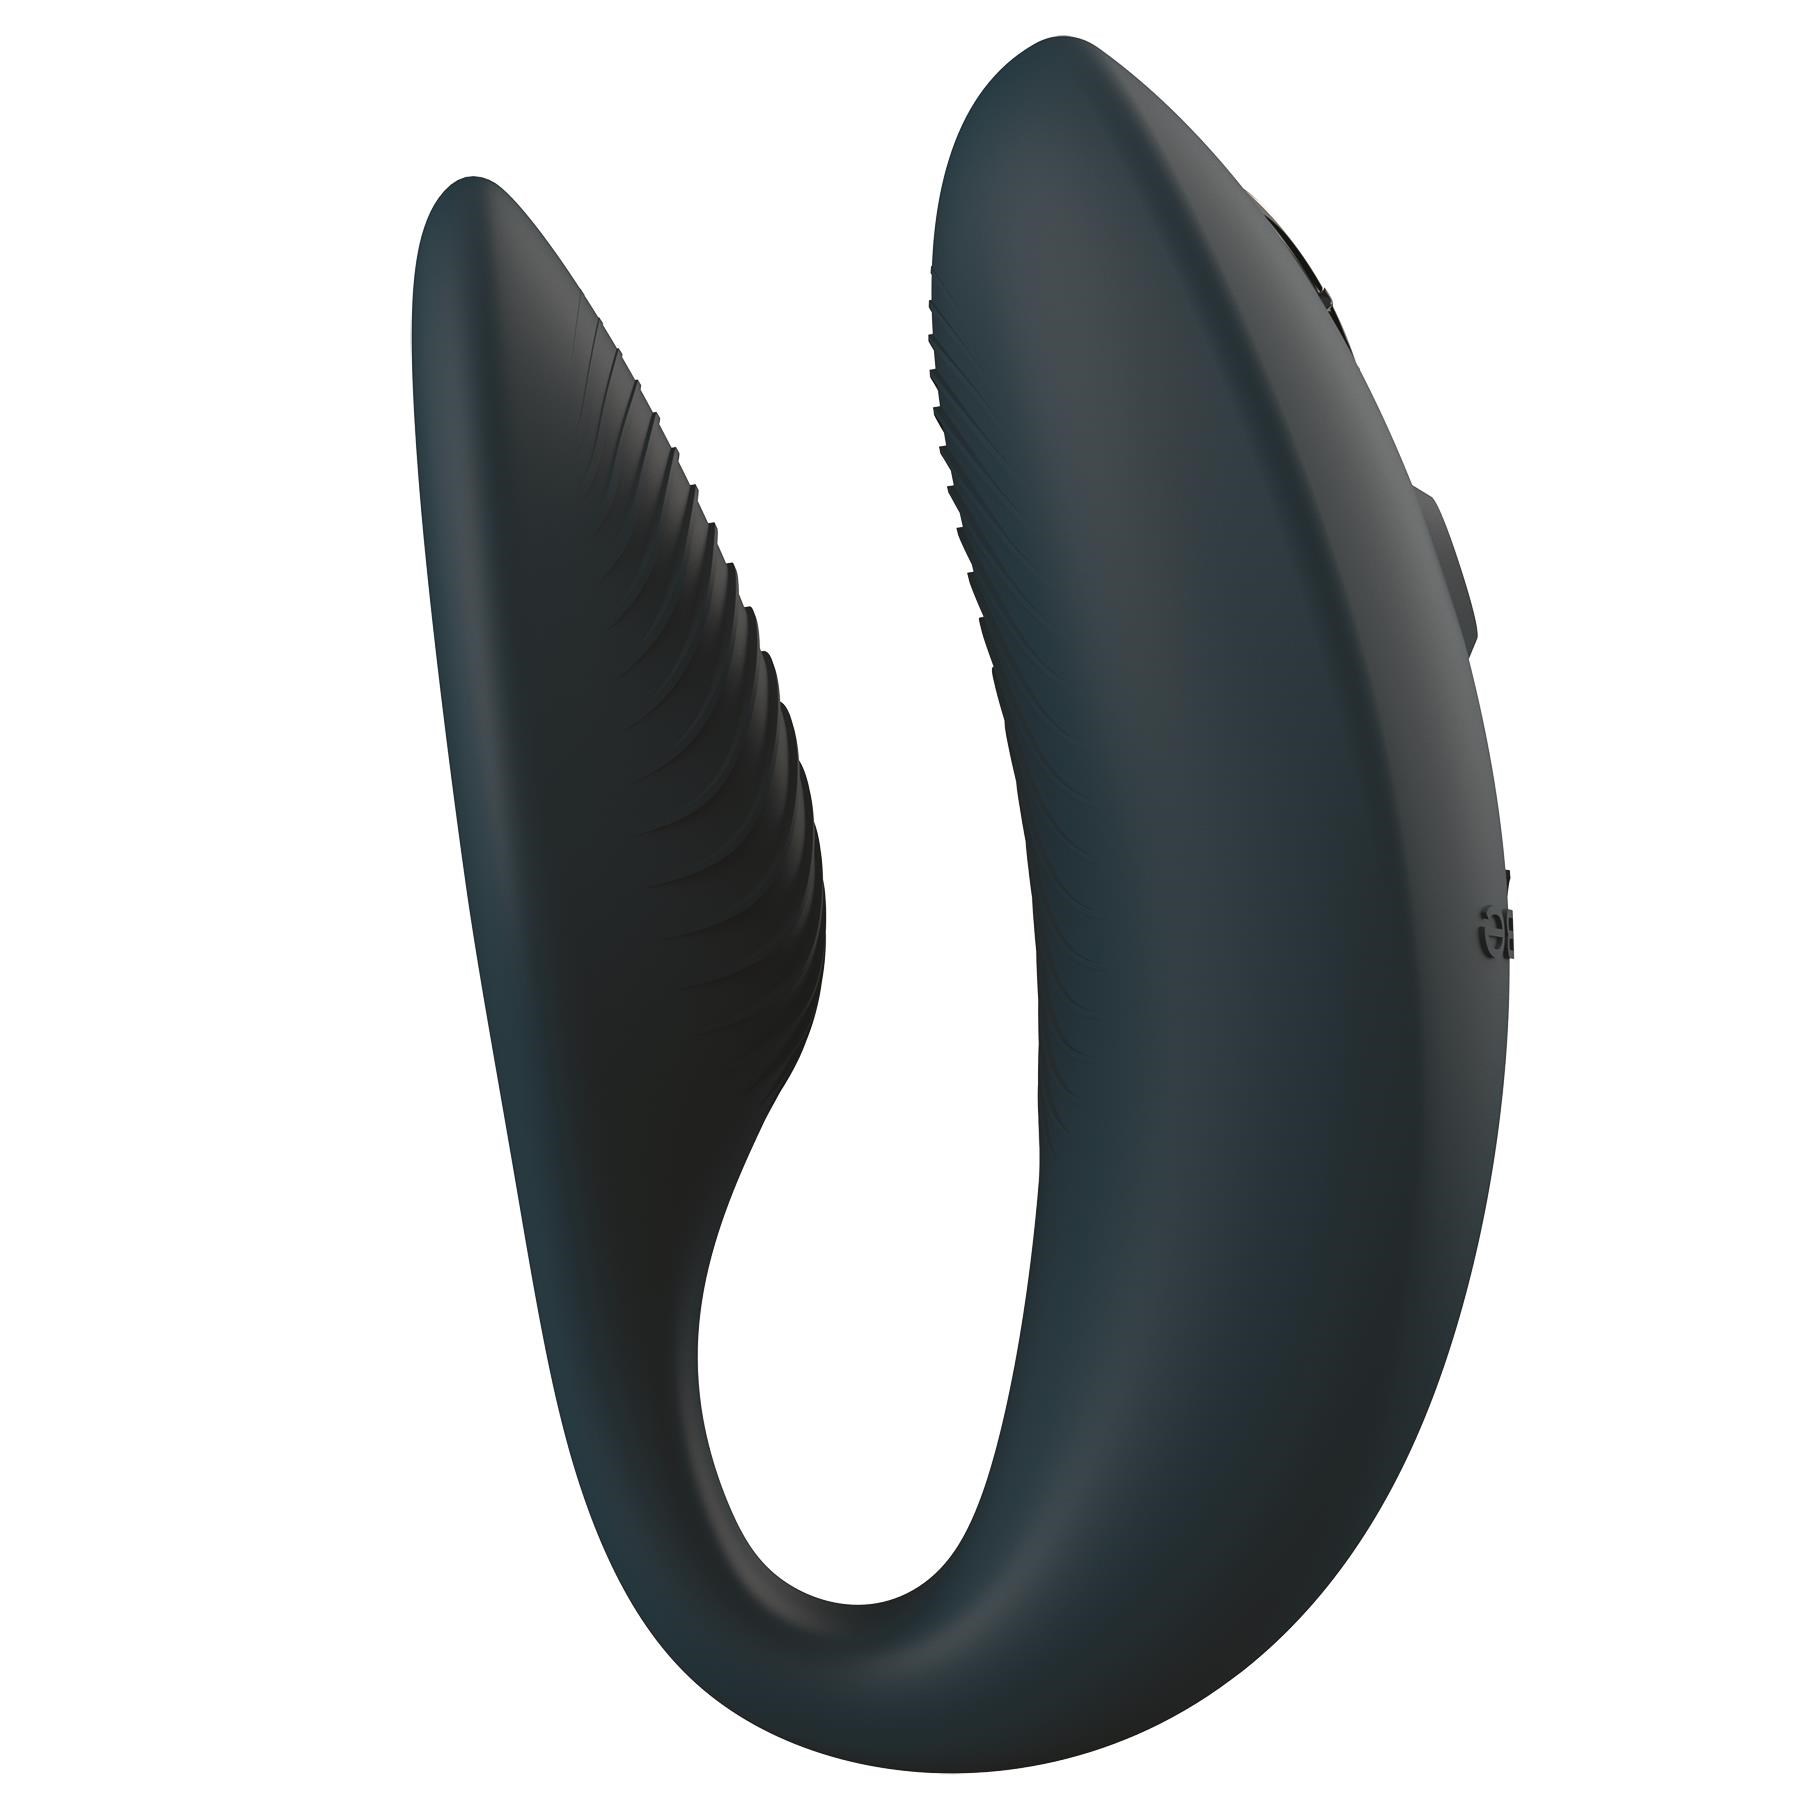 We-Vibe Sync 2 Couples Massager - Product Shot #5